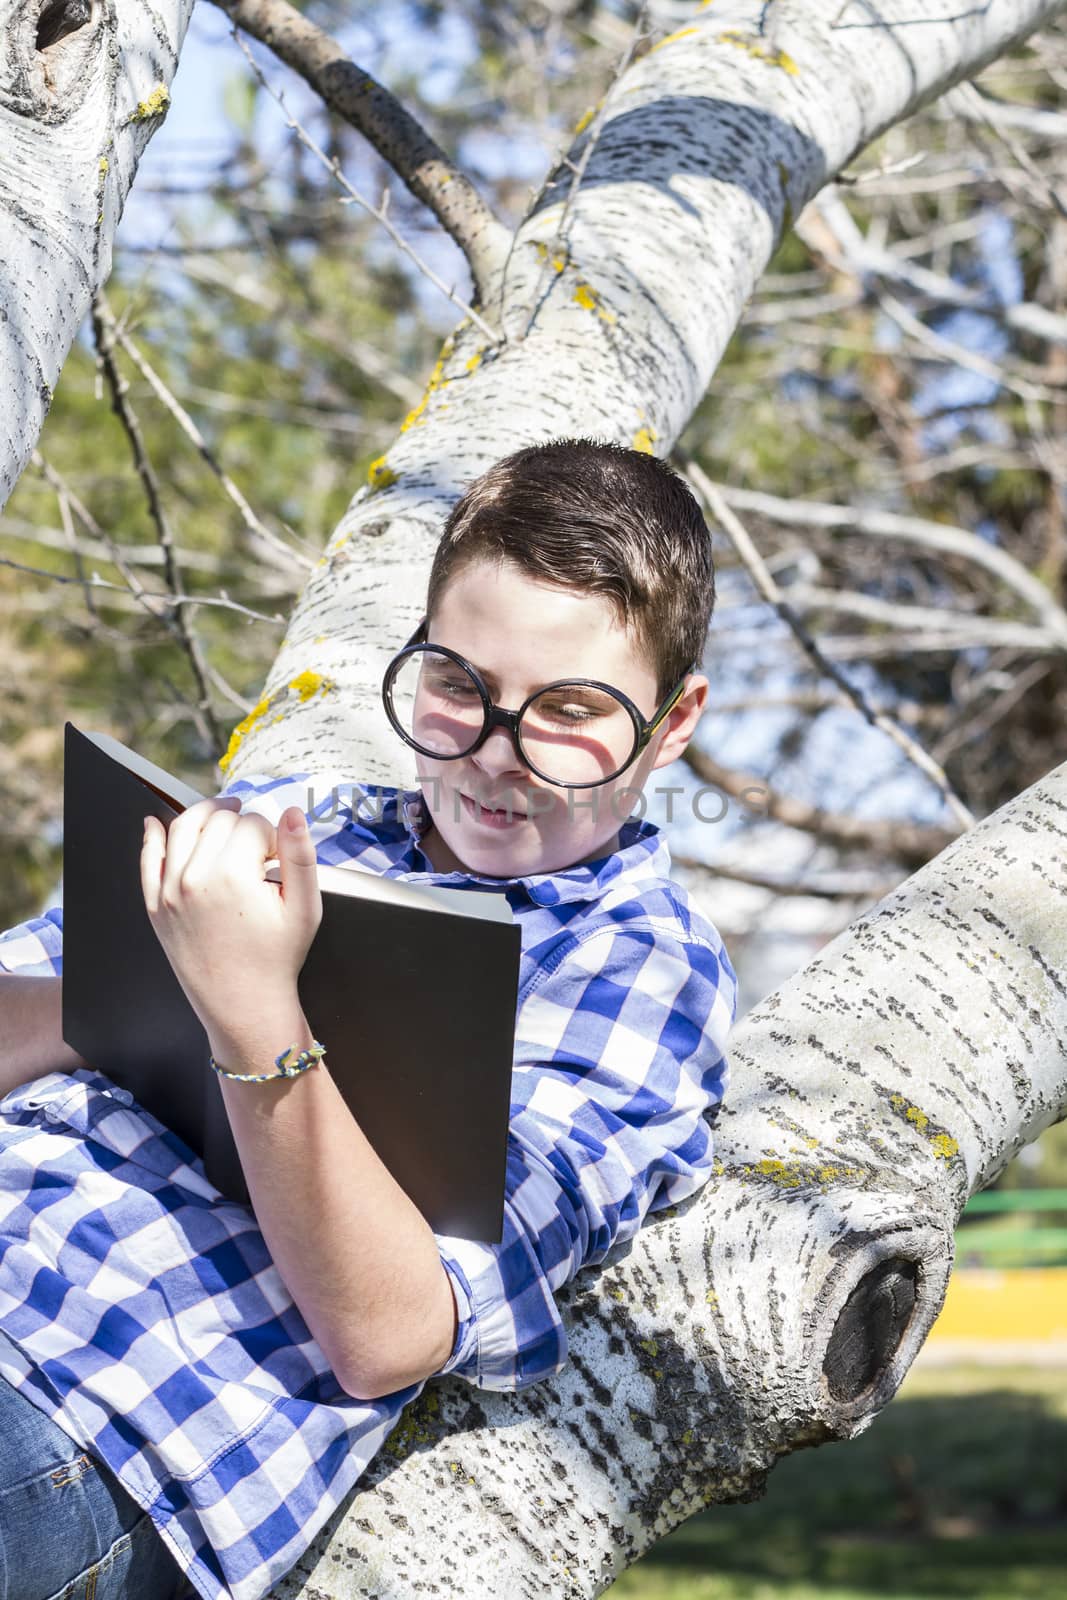 School.Huge glasses.Student boy reading a book in the woods with shallow depth of field and copy space